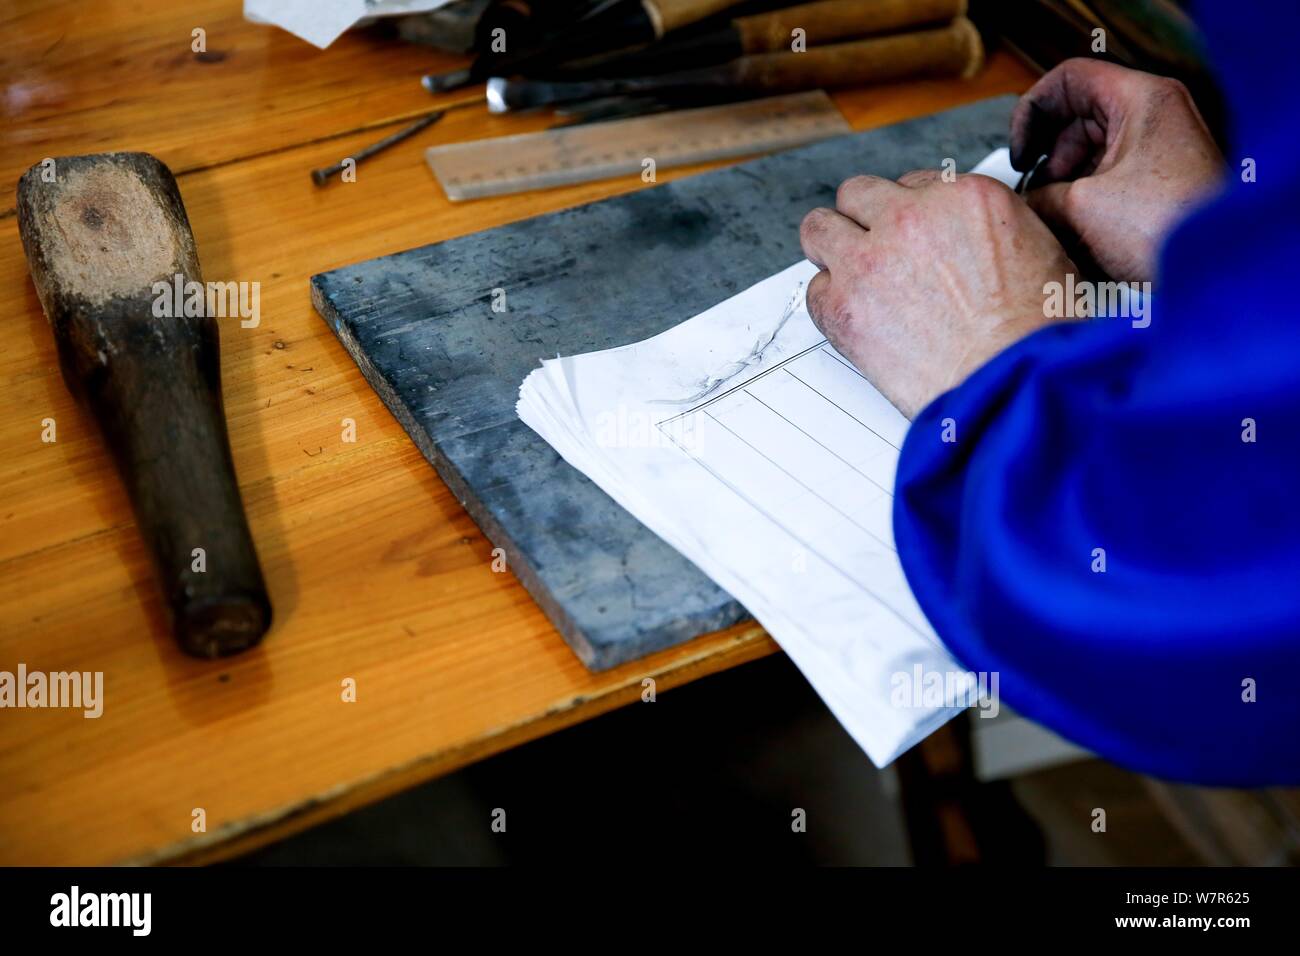 Chinese craftsman Xiao Shihua prepares to print a book through a wood typehead plate for movable type printing in Zhulin village, Tantou town, Shaoyan Stock Photo